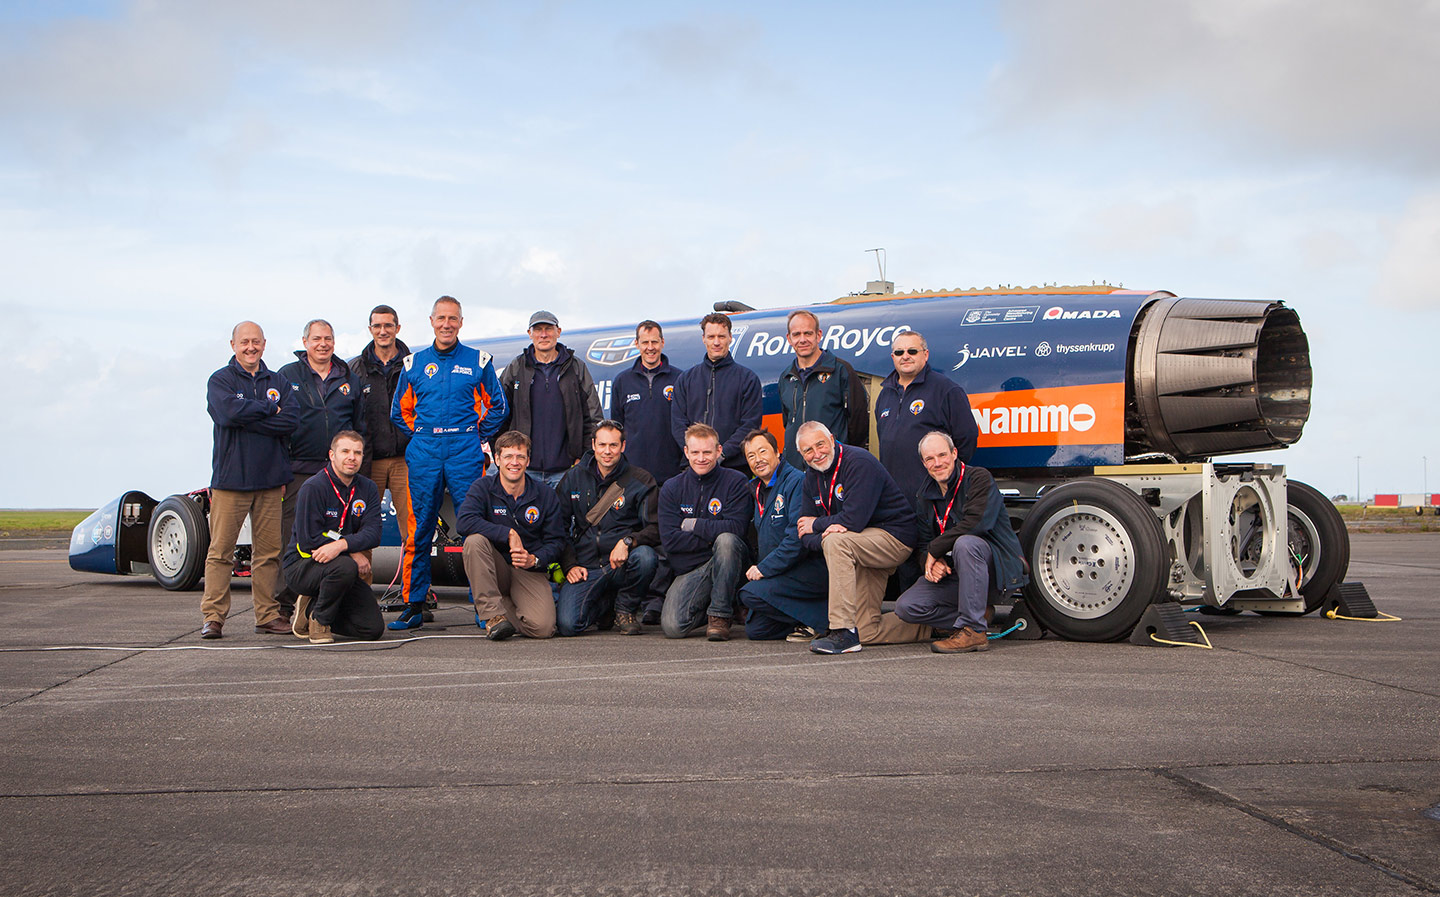 From 0 to 200mph in 7sec: Bloodhound land speed record car's first jet-powered run